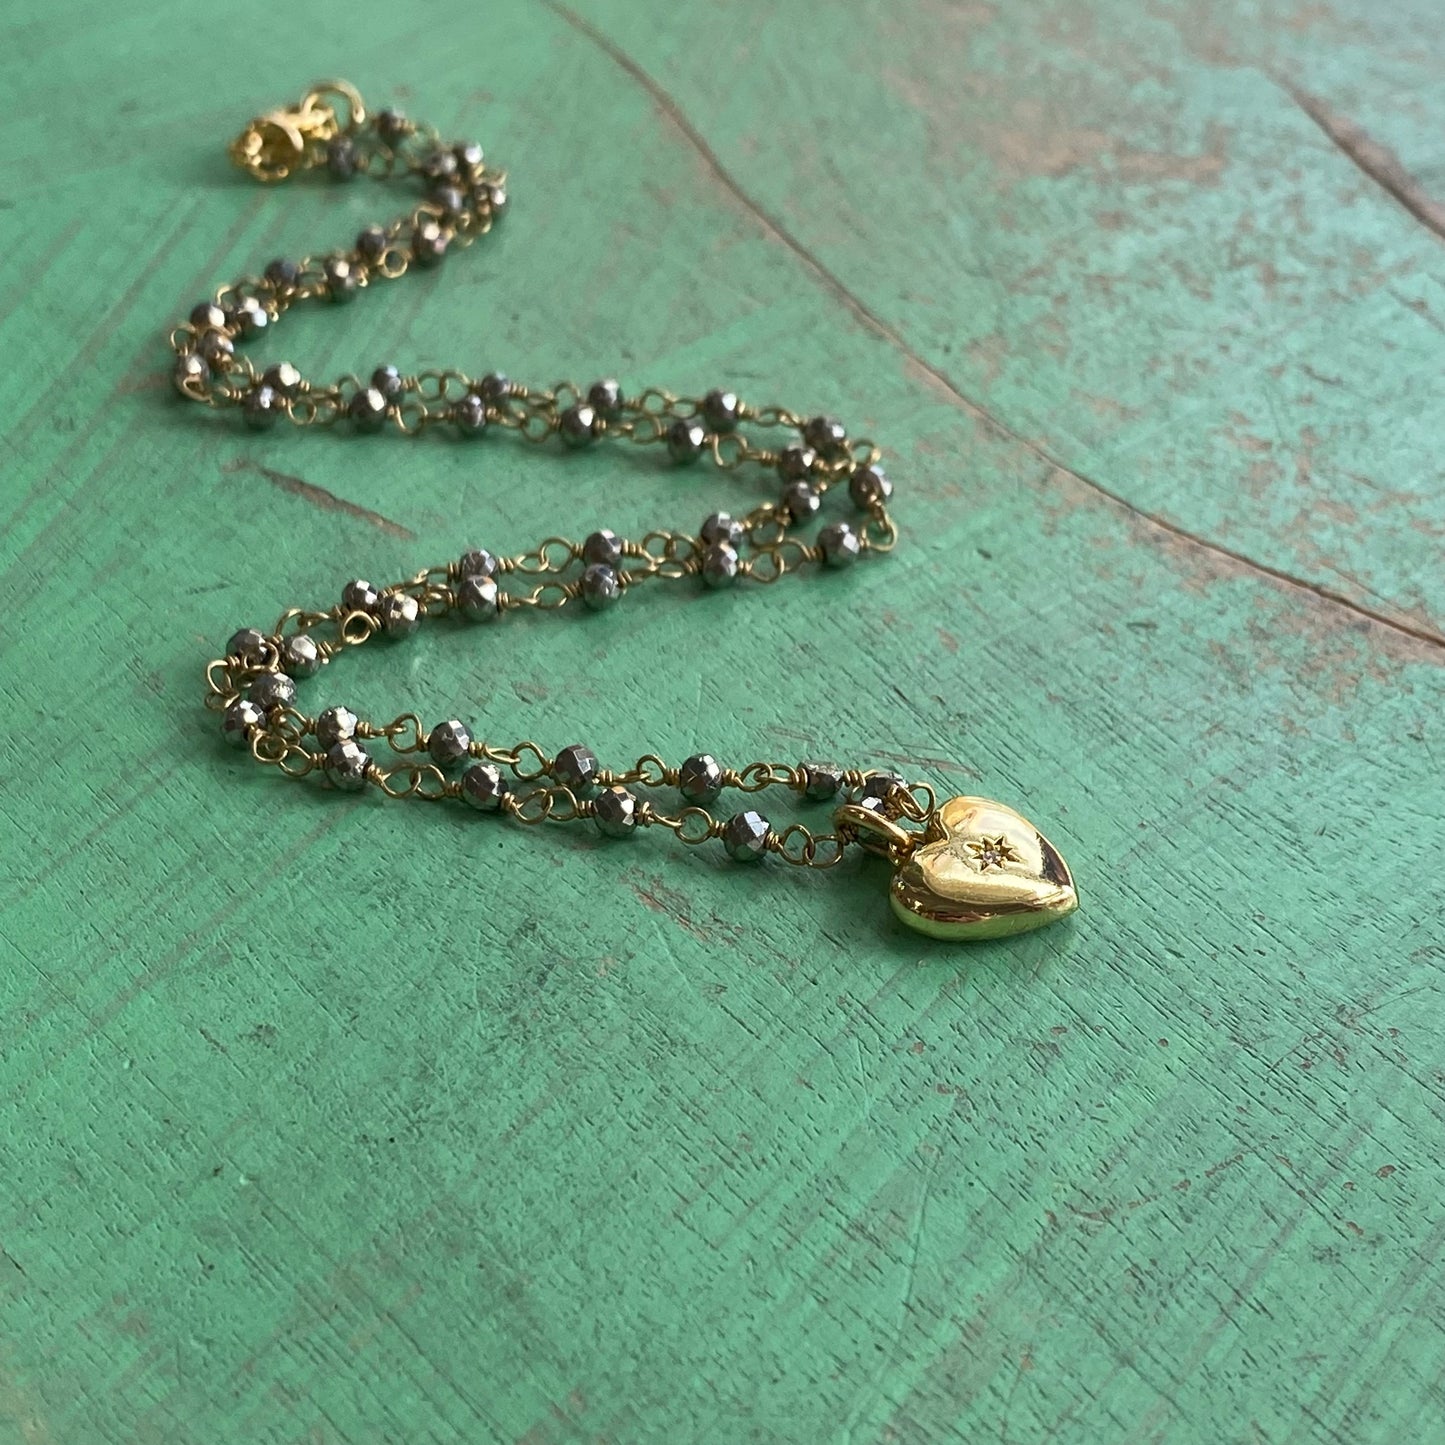 North Star Heart Necklace